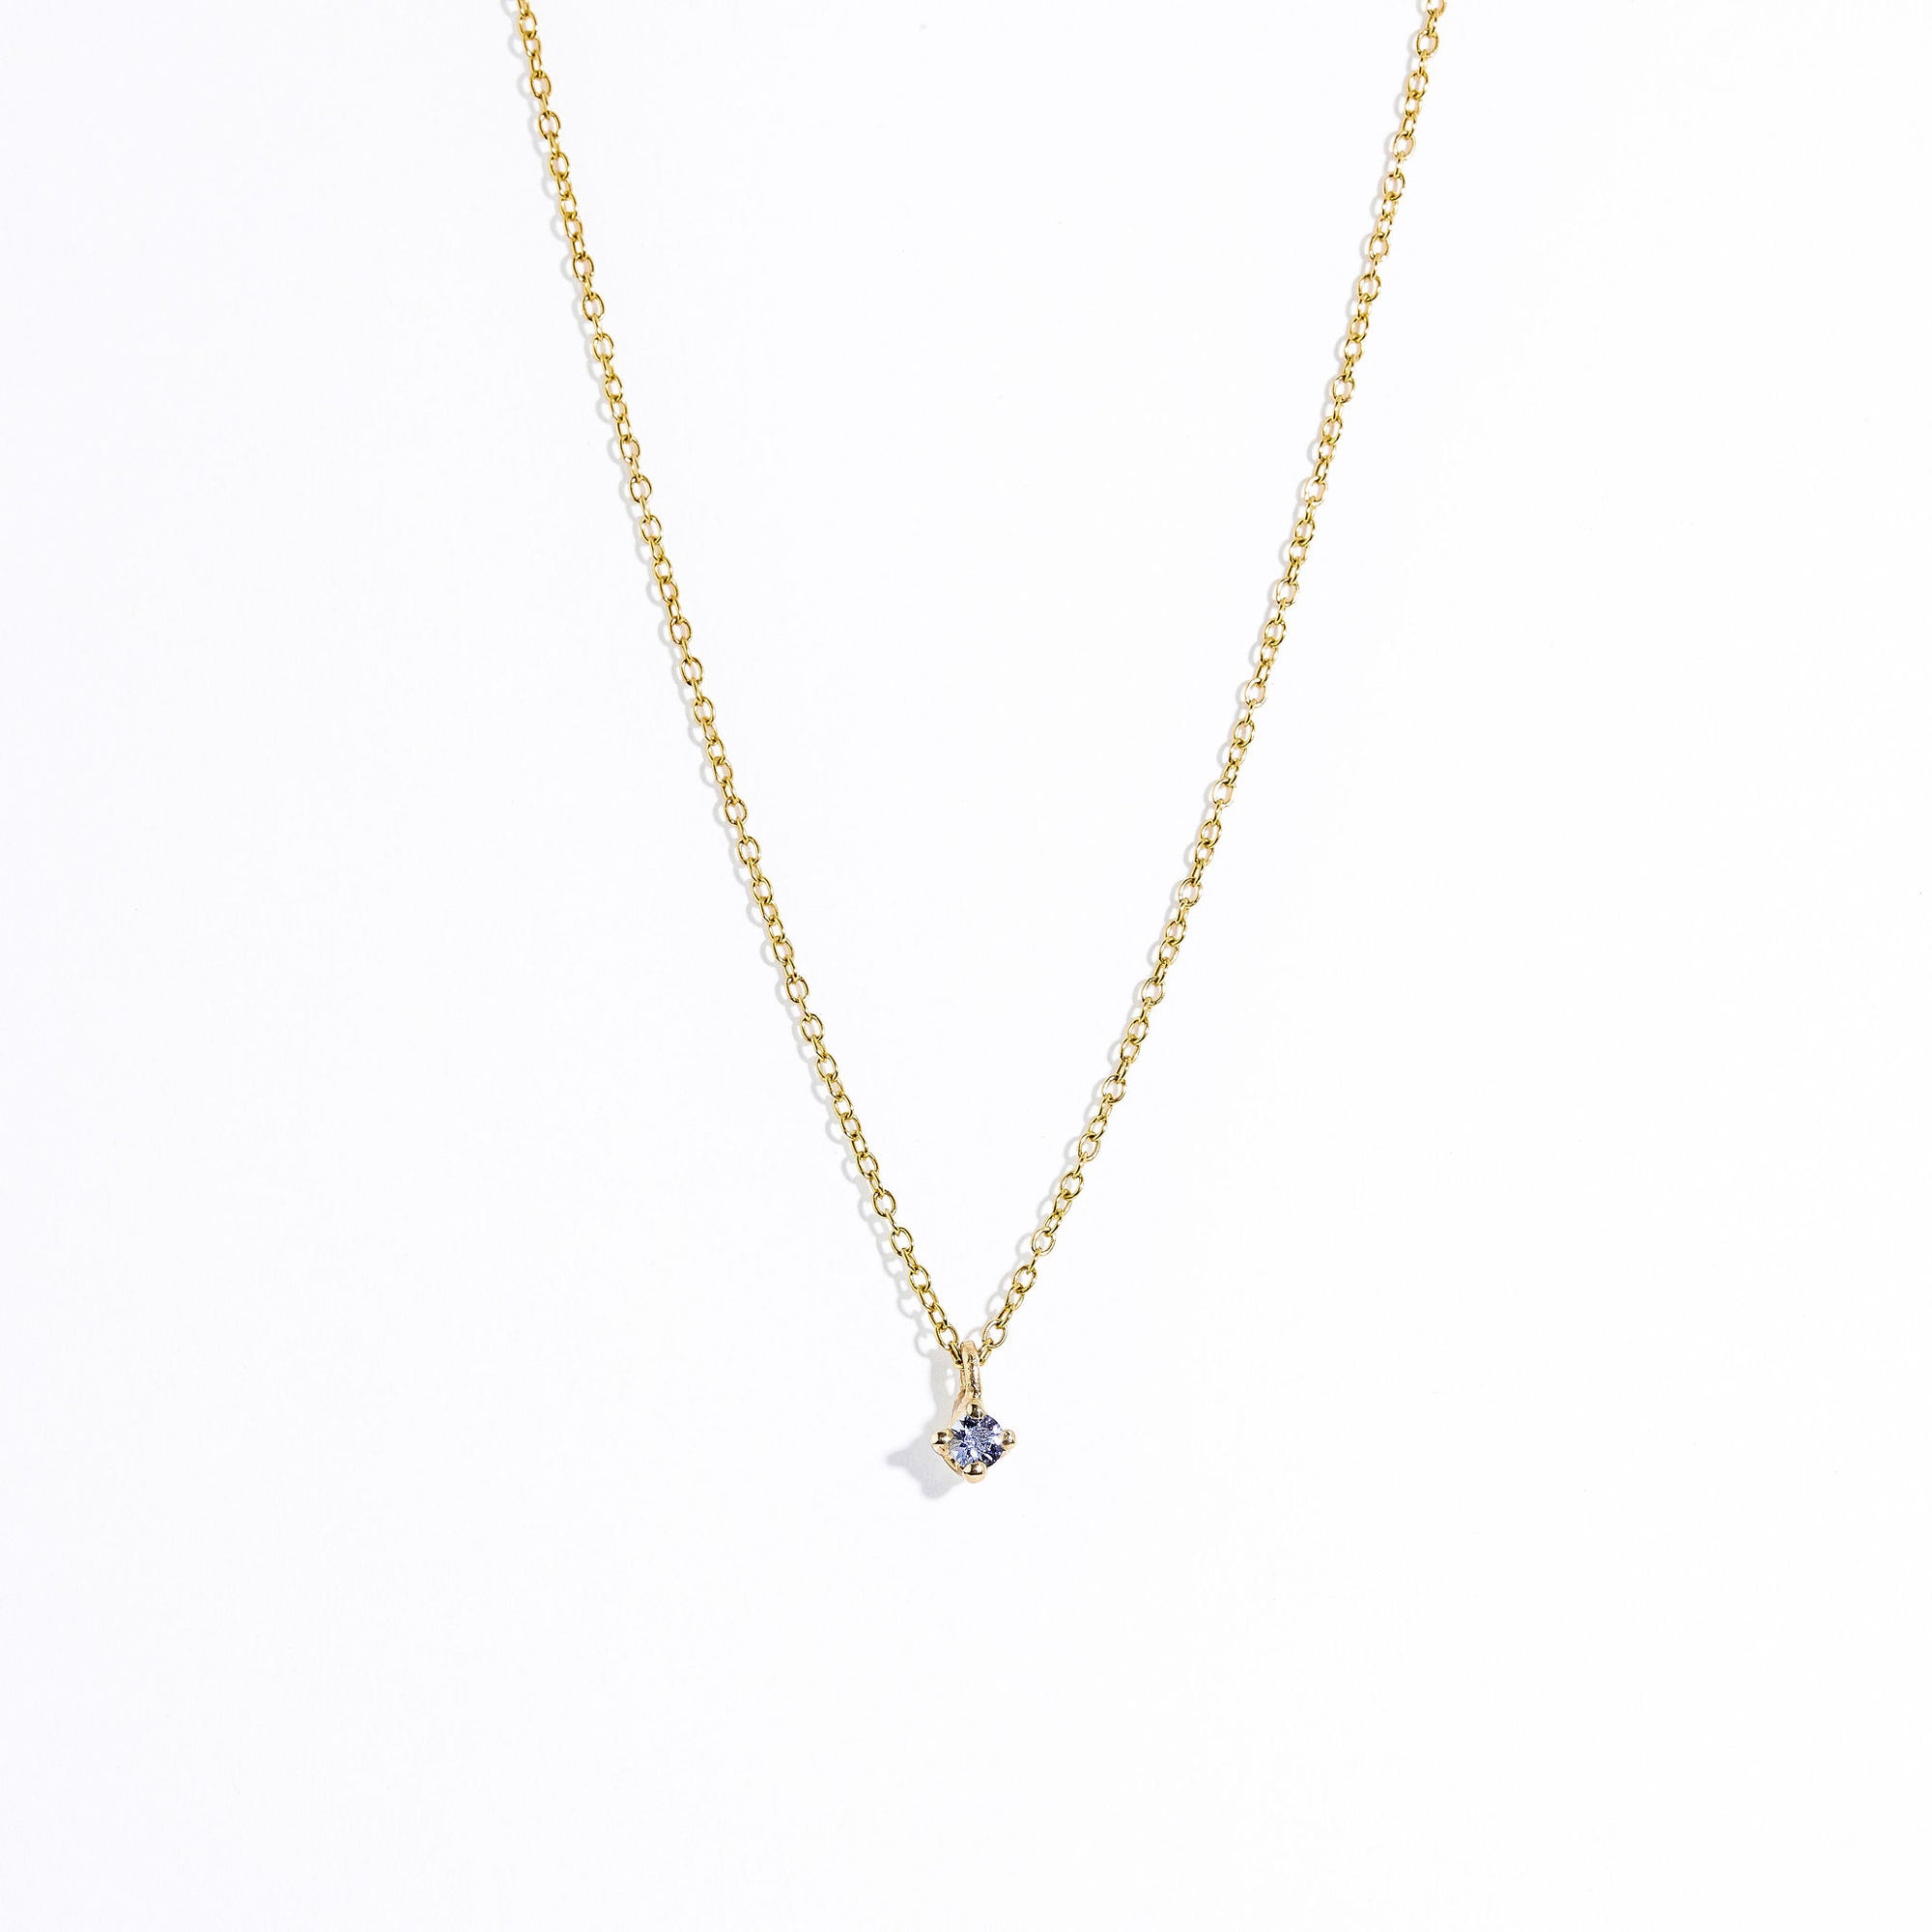 Single stone lilac Ceylon sapphire in claw setting 9ct yellow on chain. Hand made by Black Finch in Melbourne